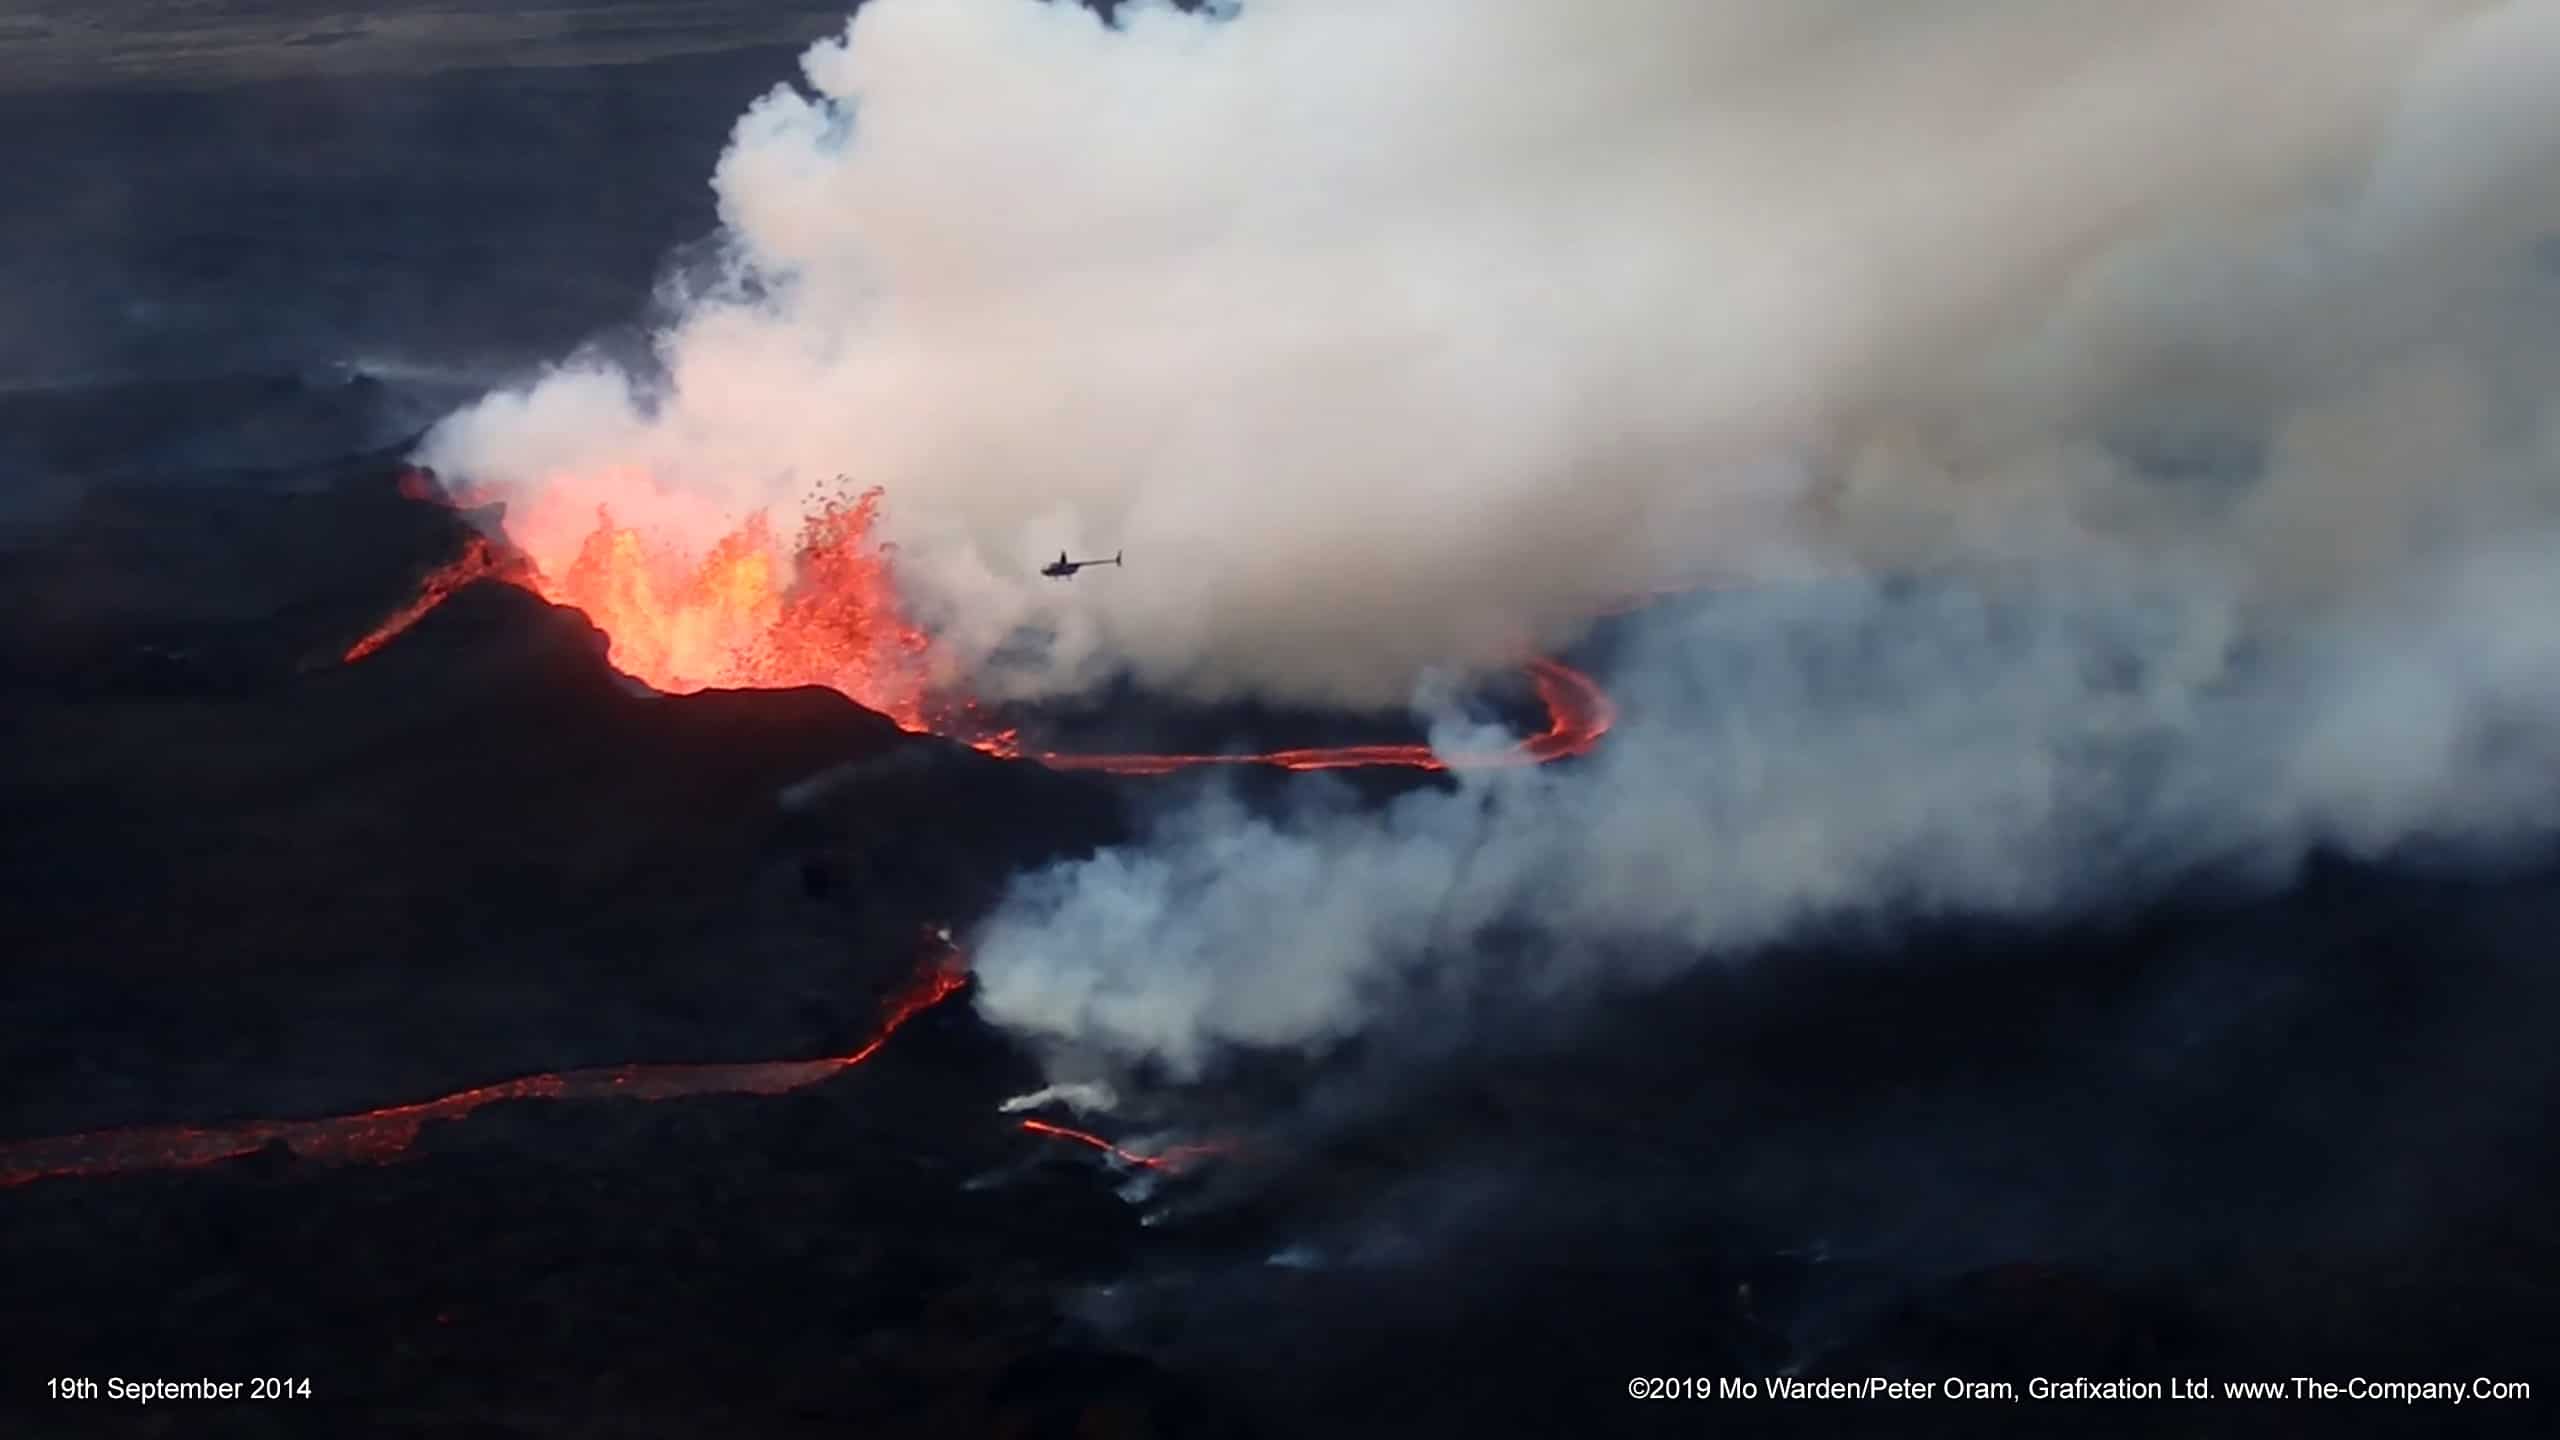 A helicopter lends scale to the lava fountains.